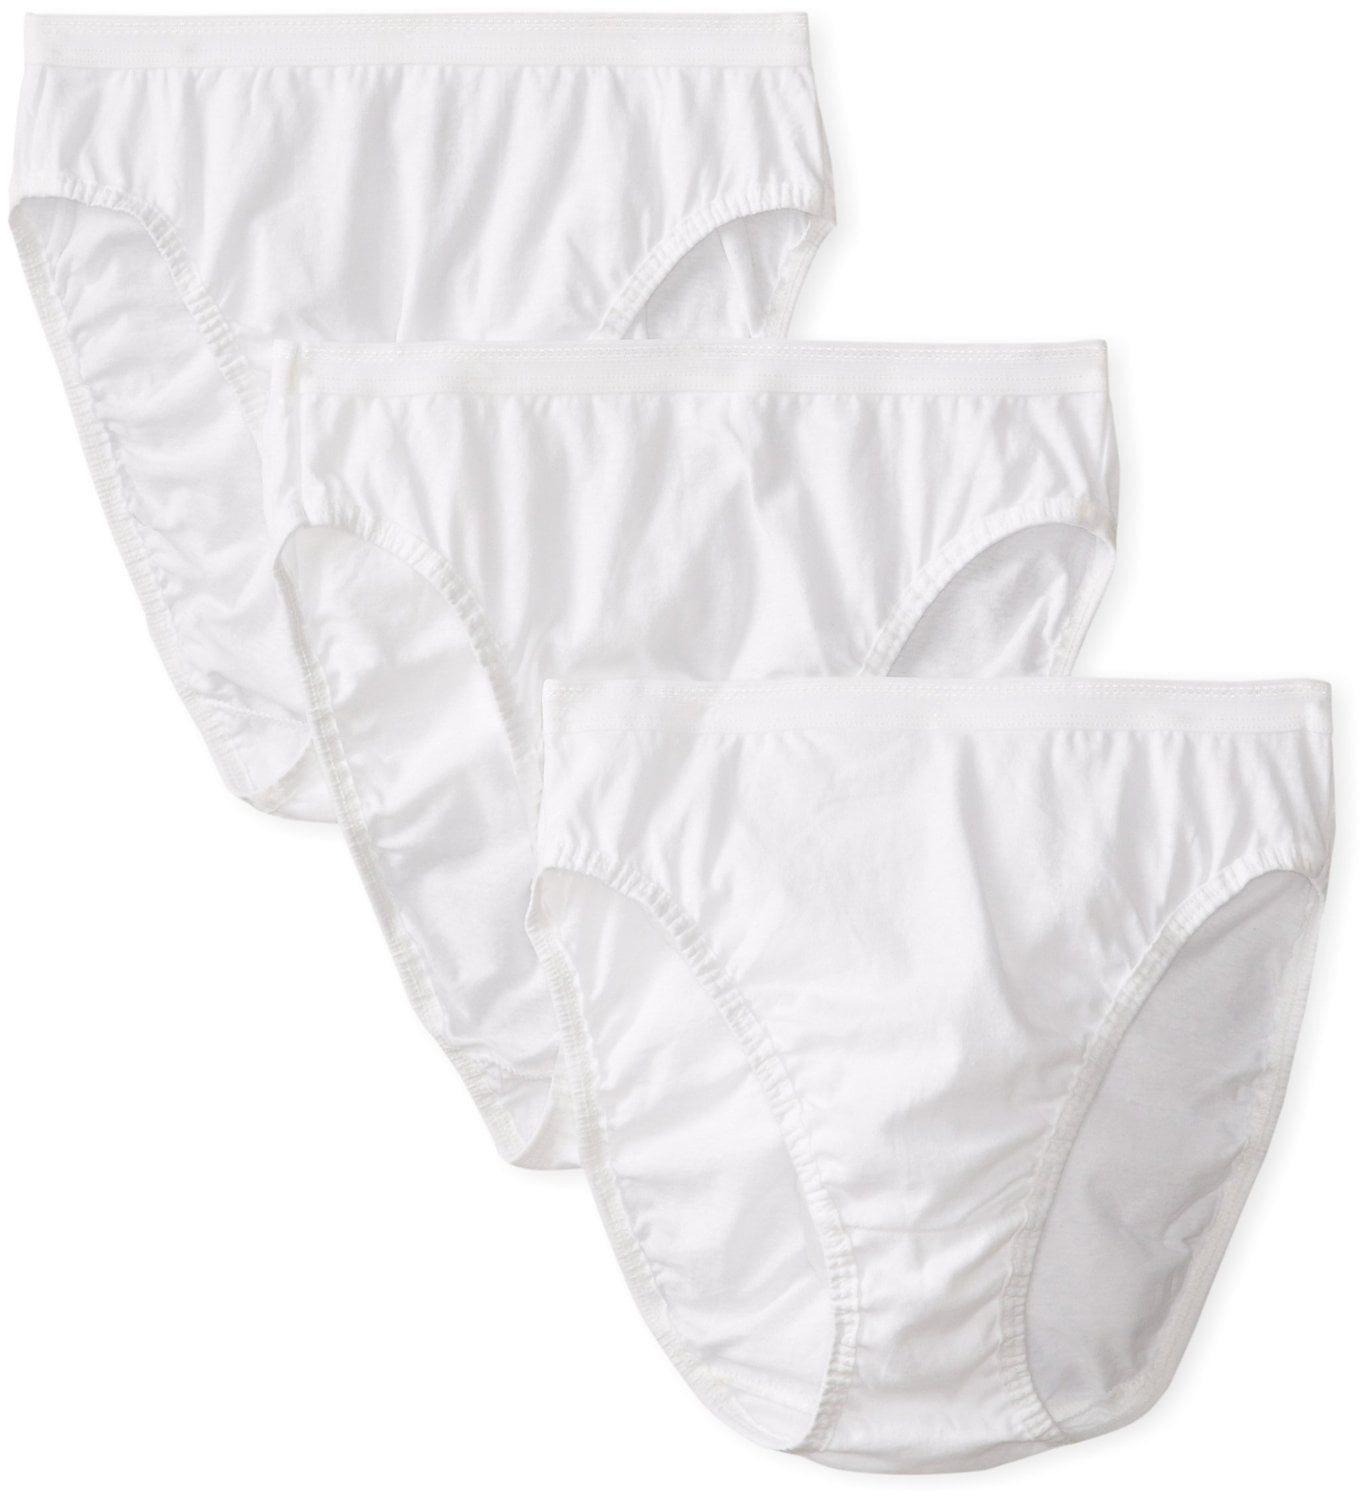 Fruit of the Loom Women`s 3 Pack White Cotton Hi-Cut Brief Panty, 10 ...